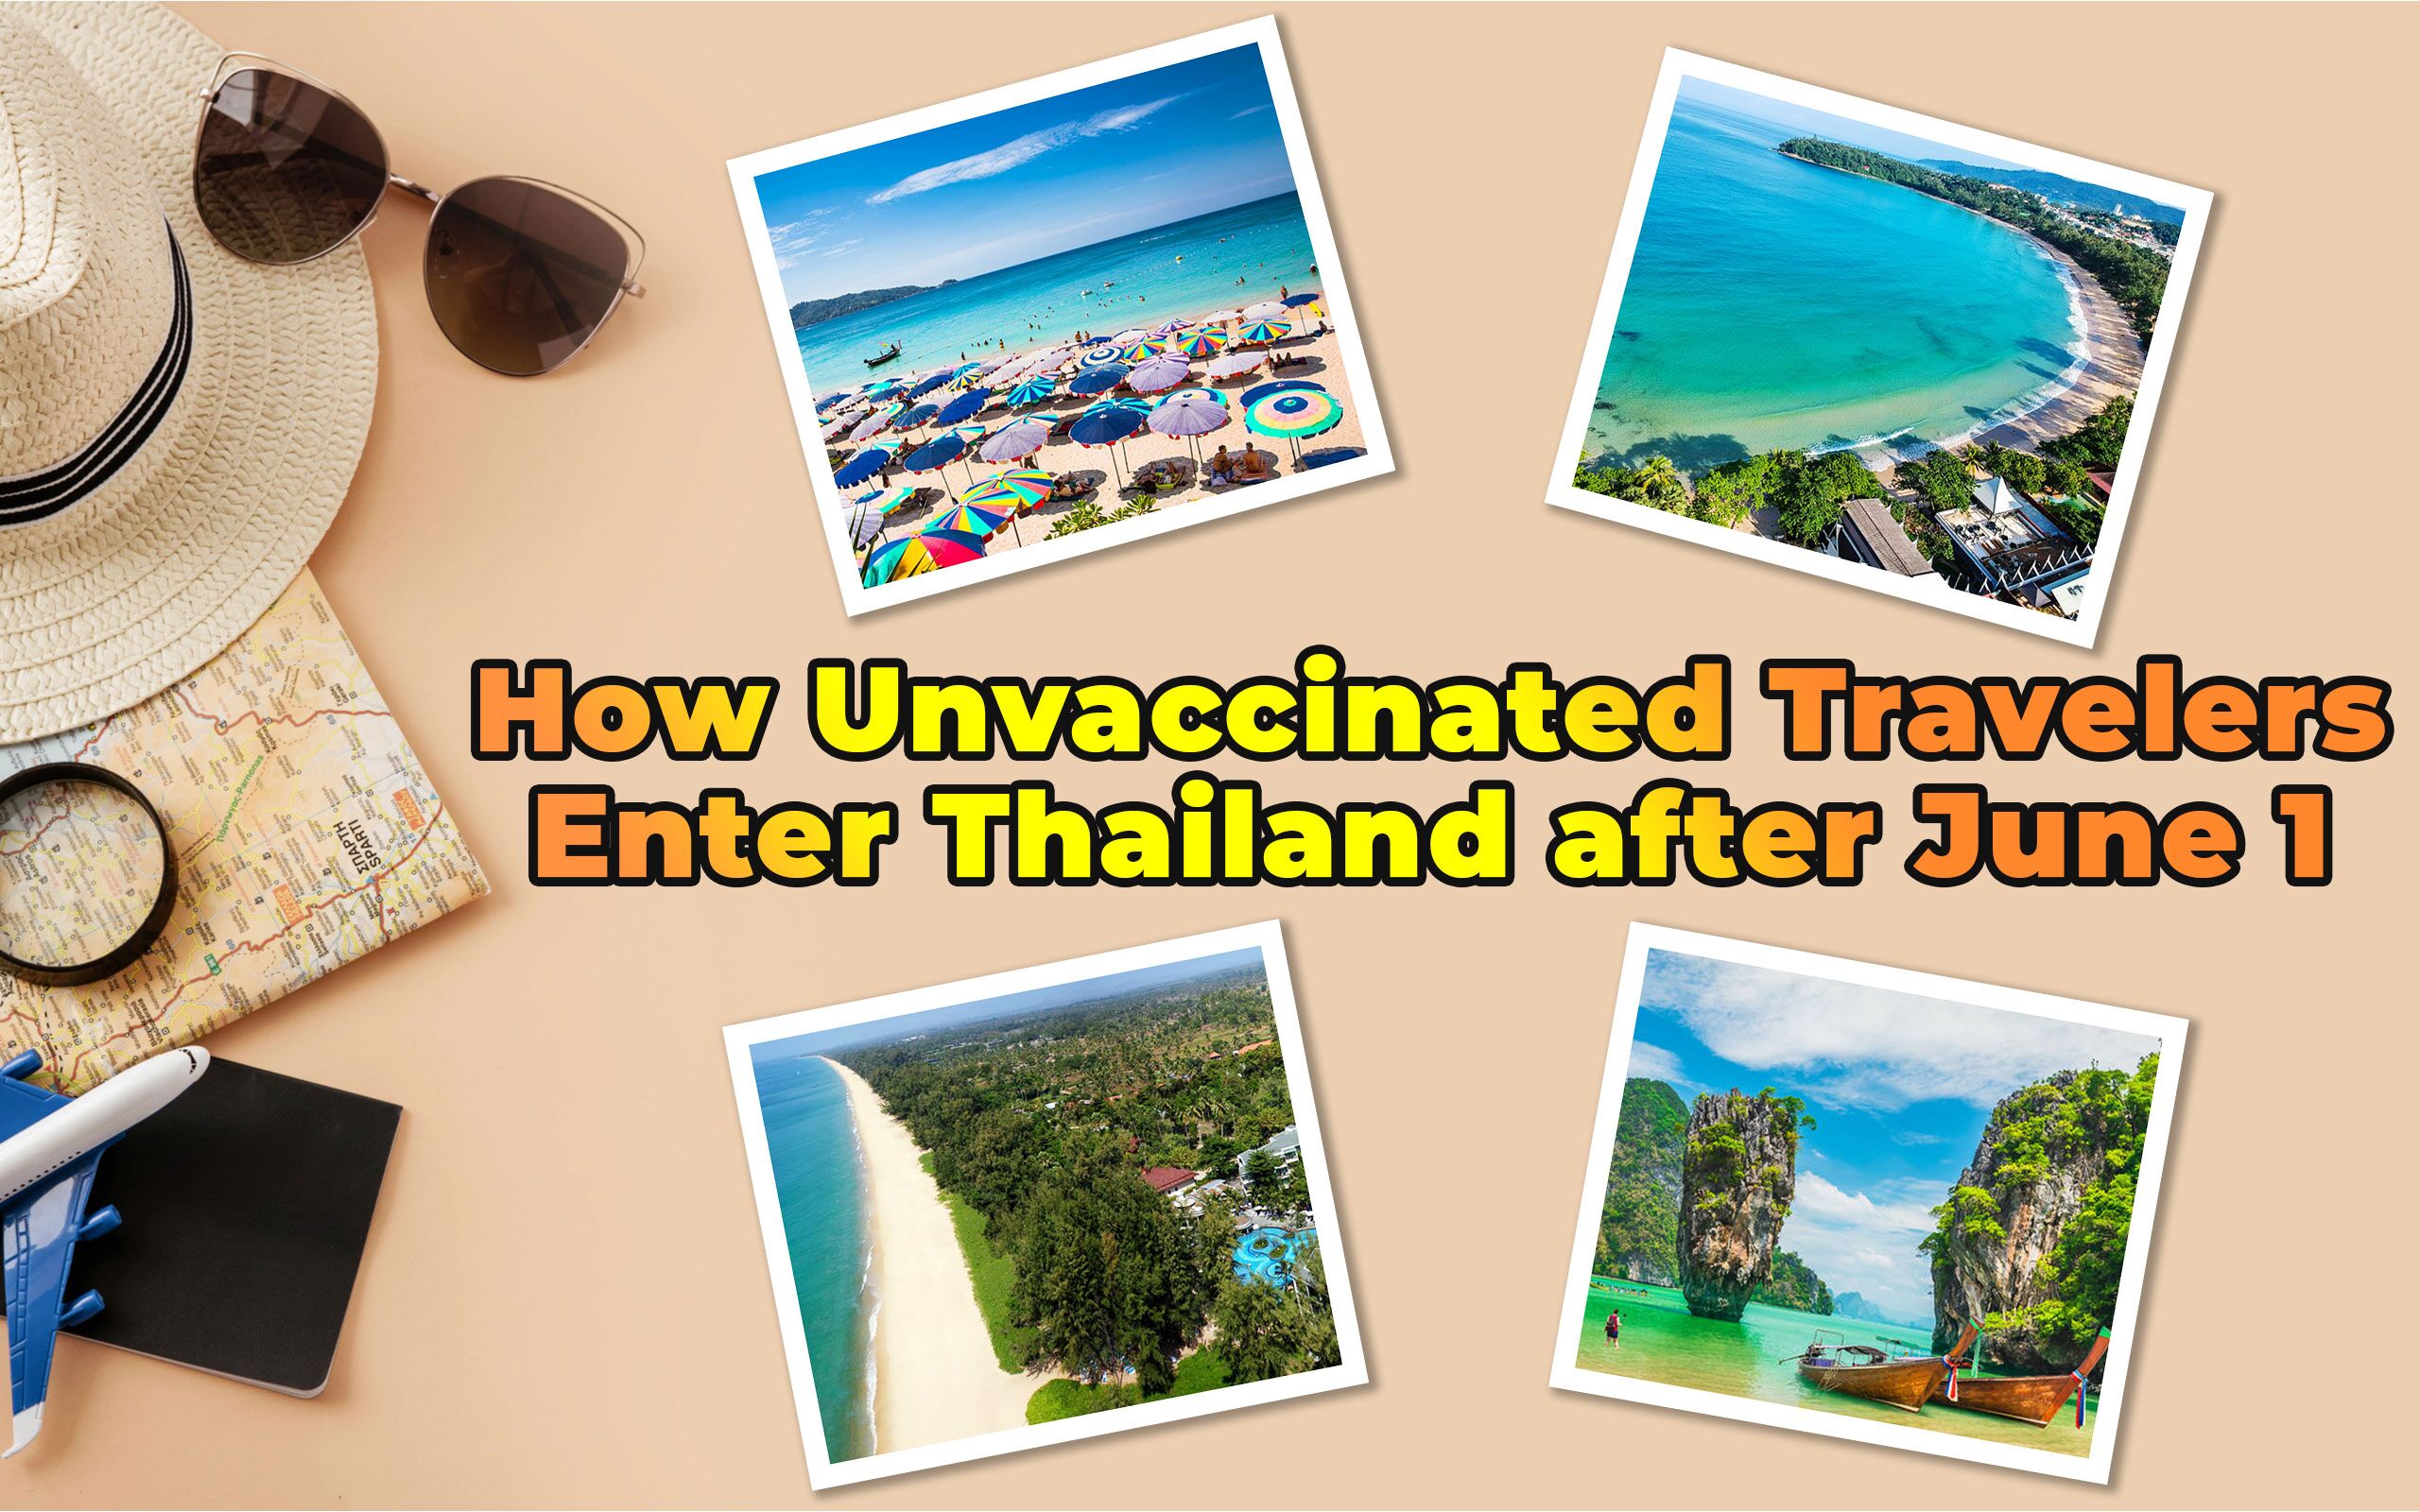 Travel to Thailand for Unvaccinated Travelers